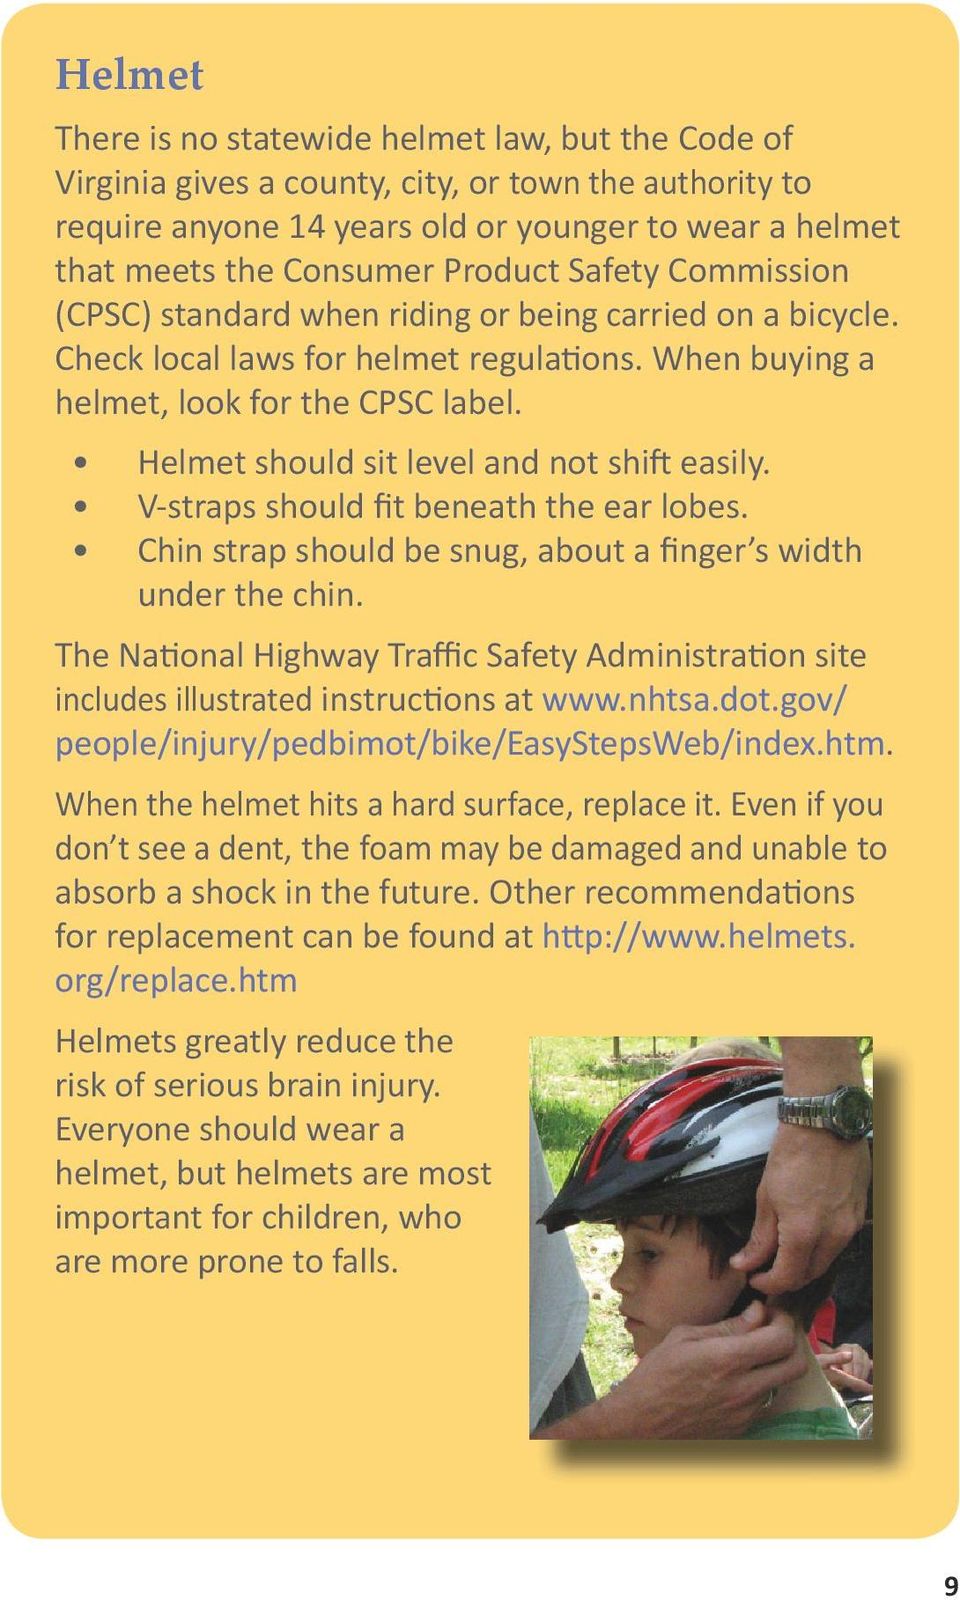 Helmet should sit level and not shift easily. V-straps should fit beneath the ear lobes. Chin strap should be snug, about a finger s width under the chin.